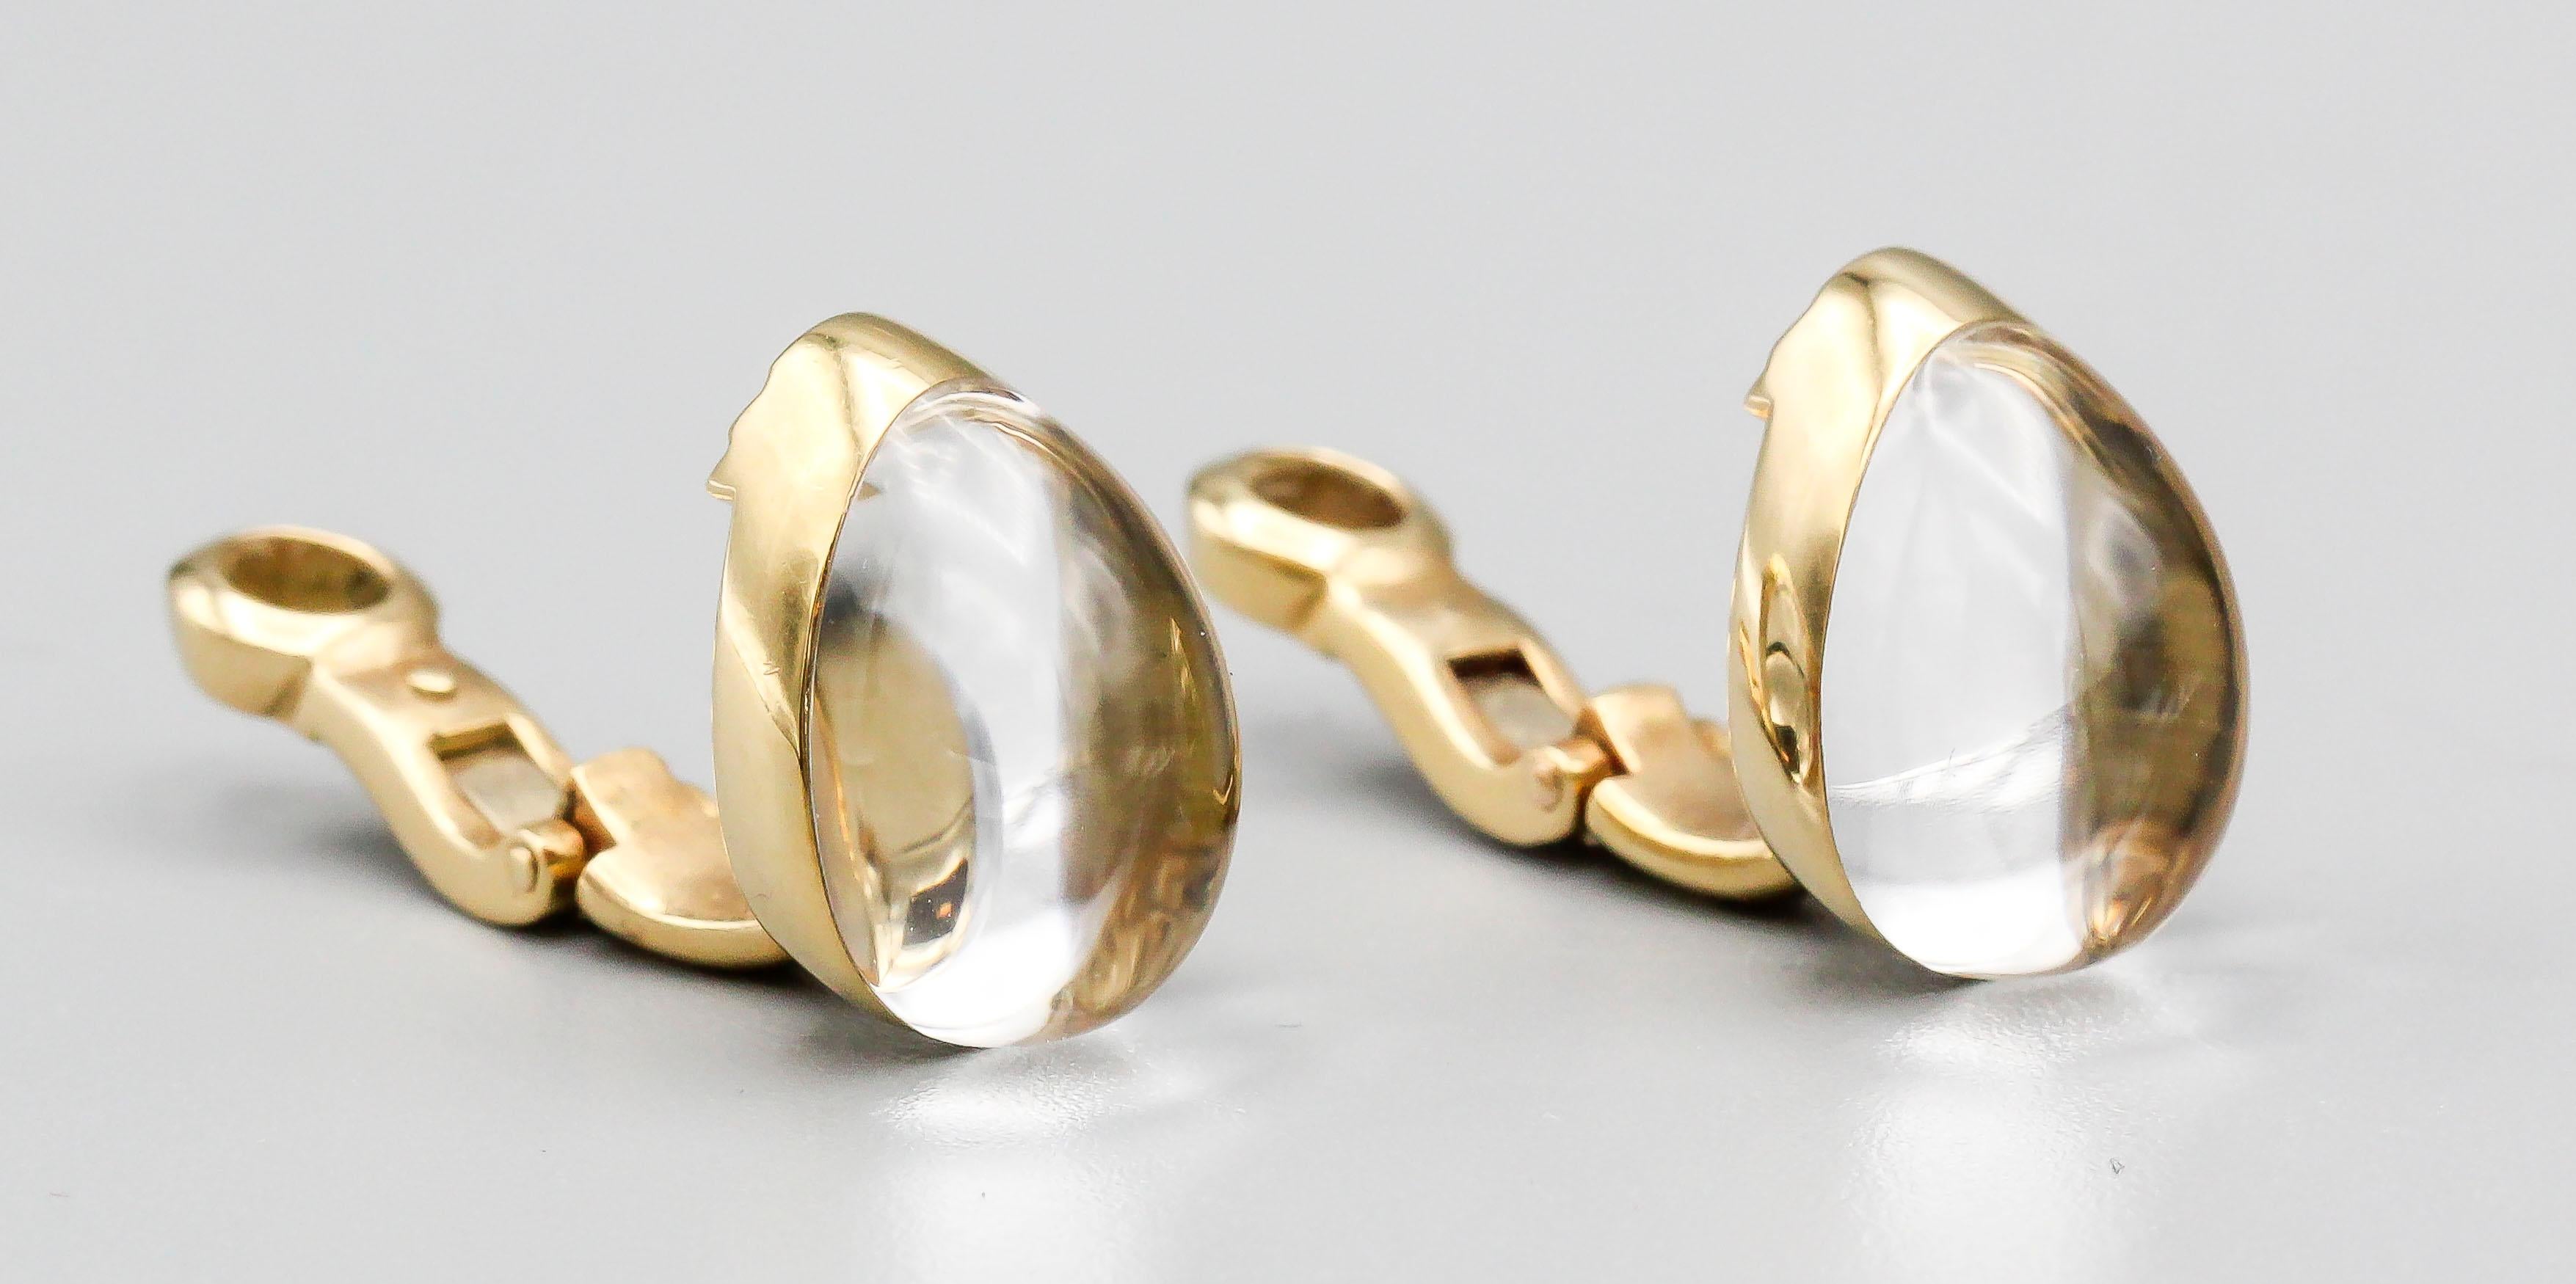 Whimsical diamond, rock crystal and 18K yellow gold earrings from the 